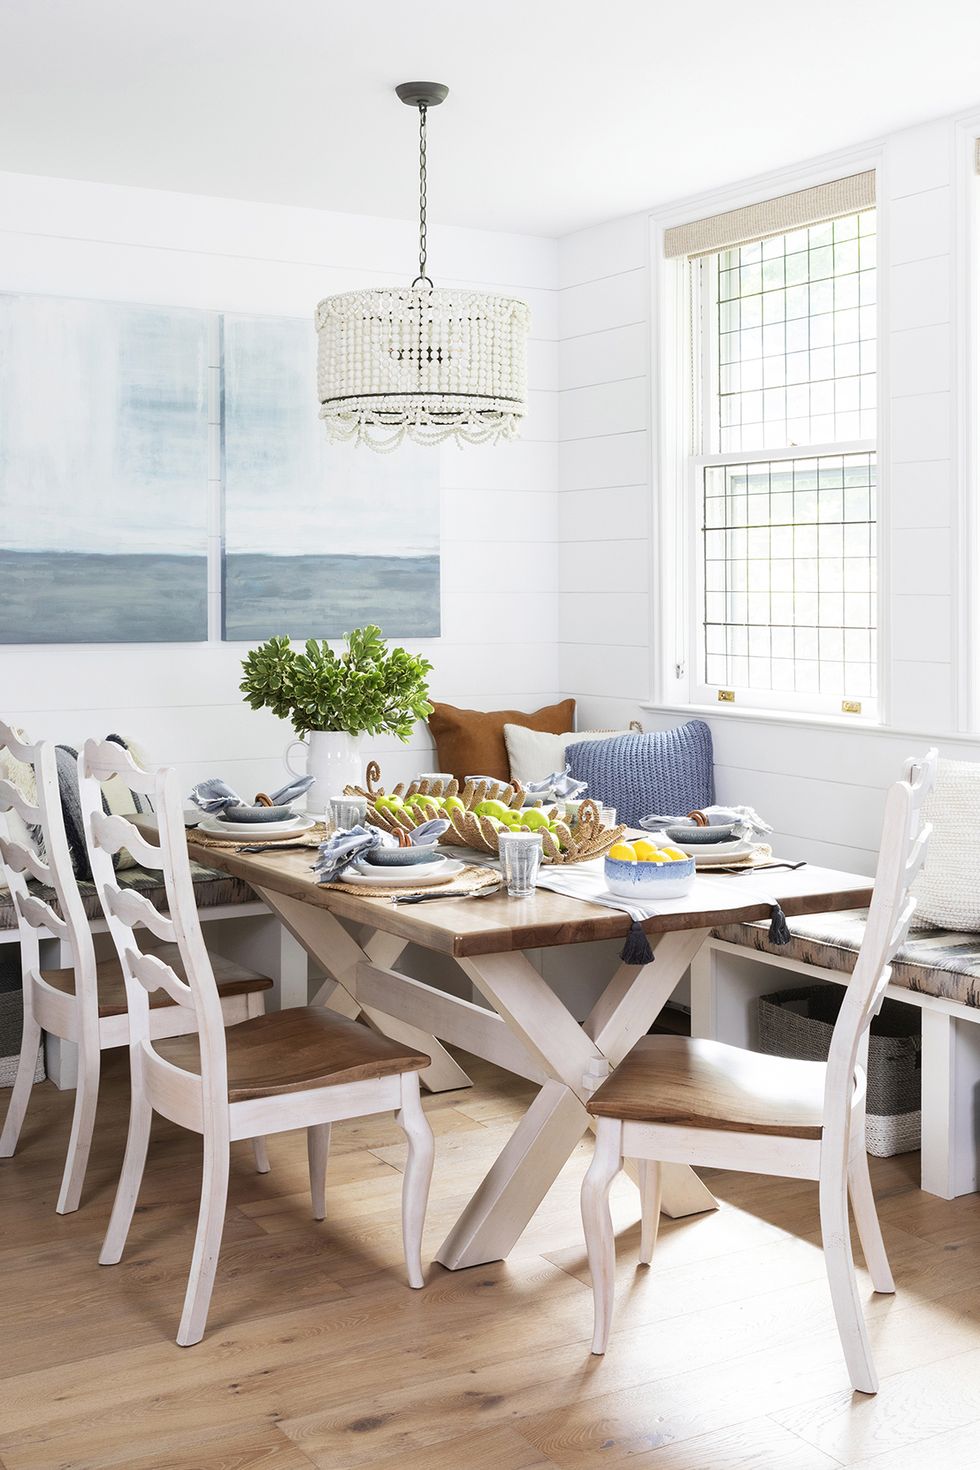 home featuring warm neutrals and soothing blue hues to accent the beautiful architecture of the vintage home interior designer karen b wolf dining room, breakfast nook